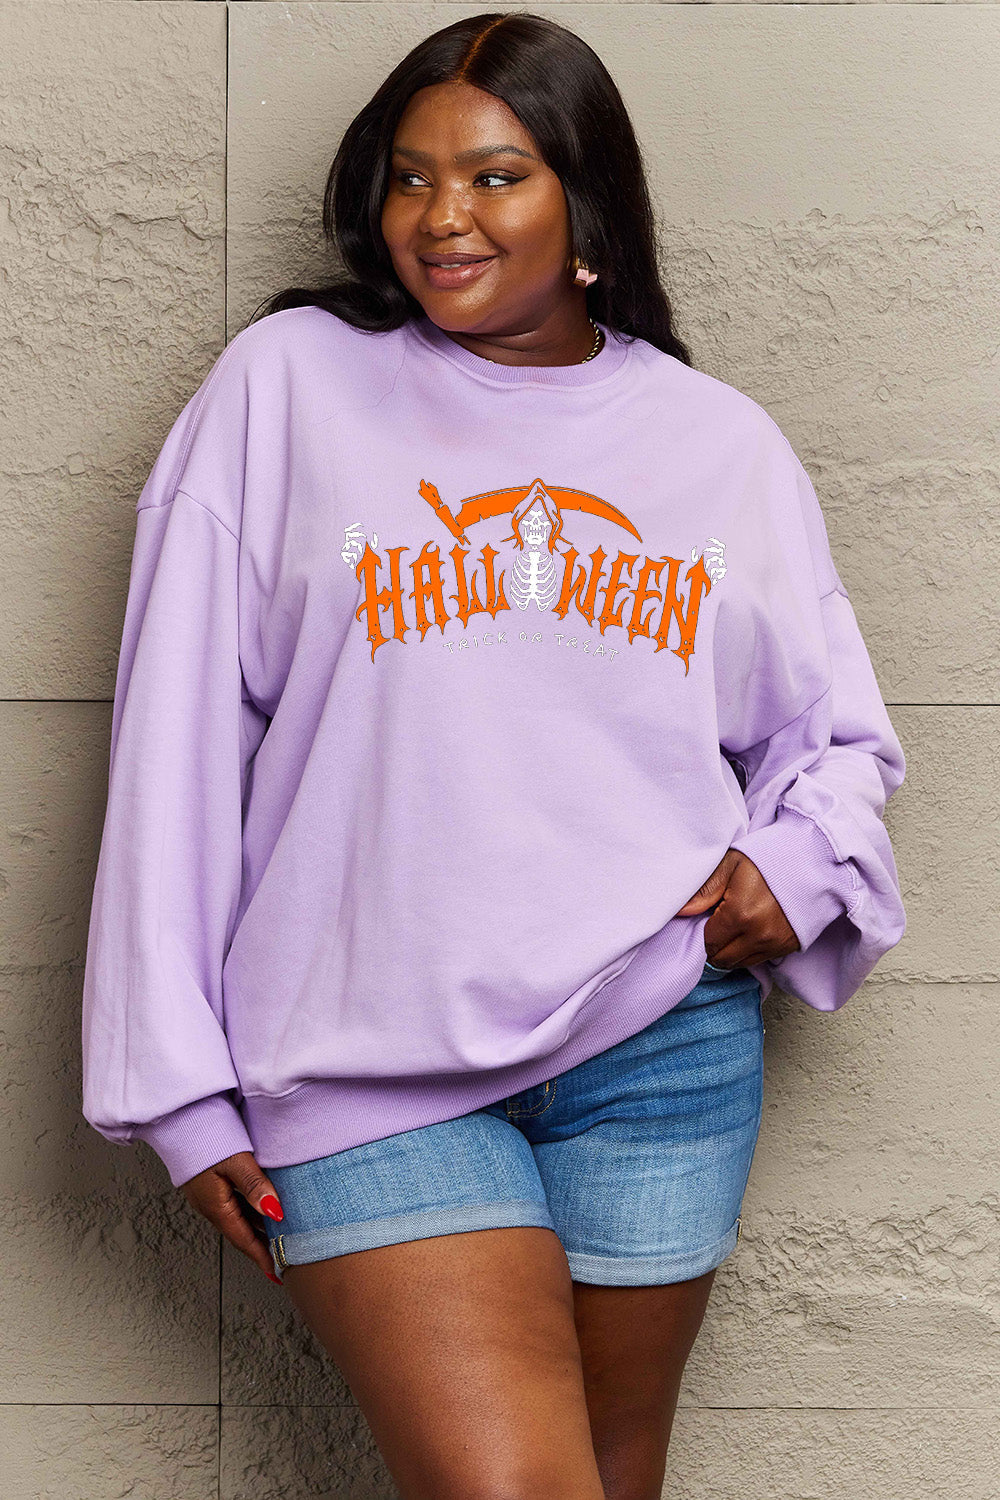 Simply Love Full Size HALLOWEEN TRICK OR TREAT Graphic Sweatshirt BLUE ZONE PLANET